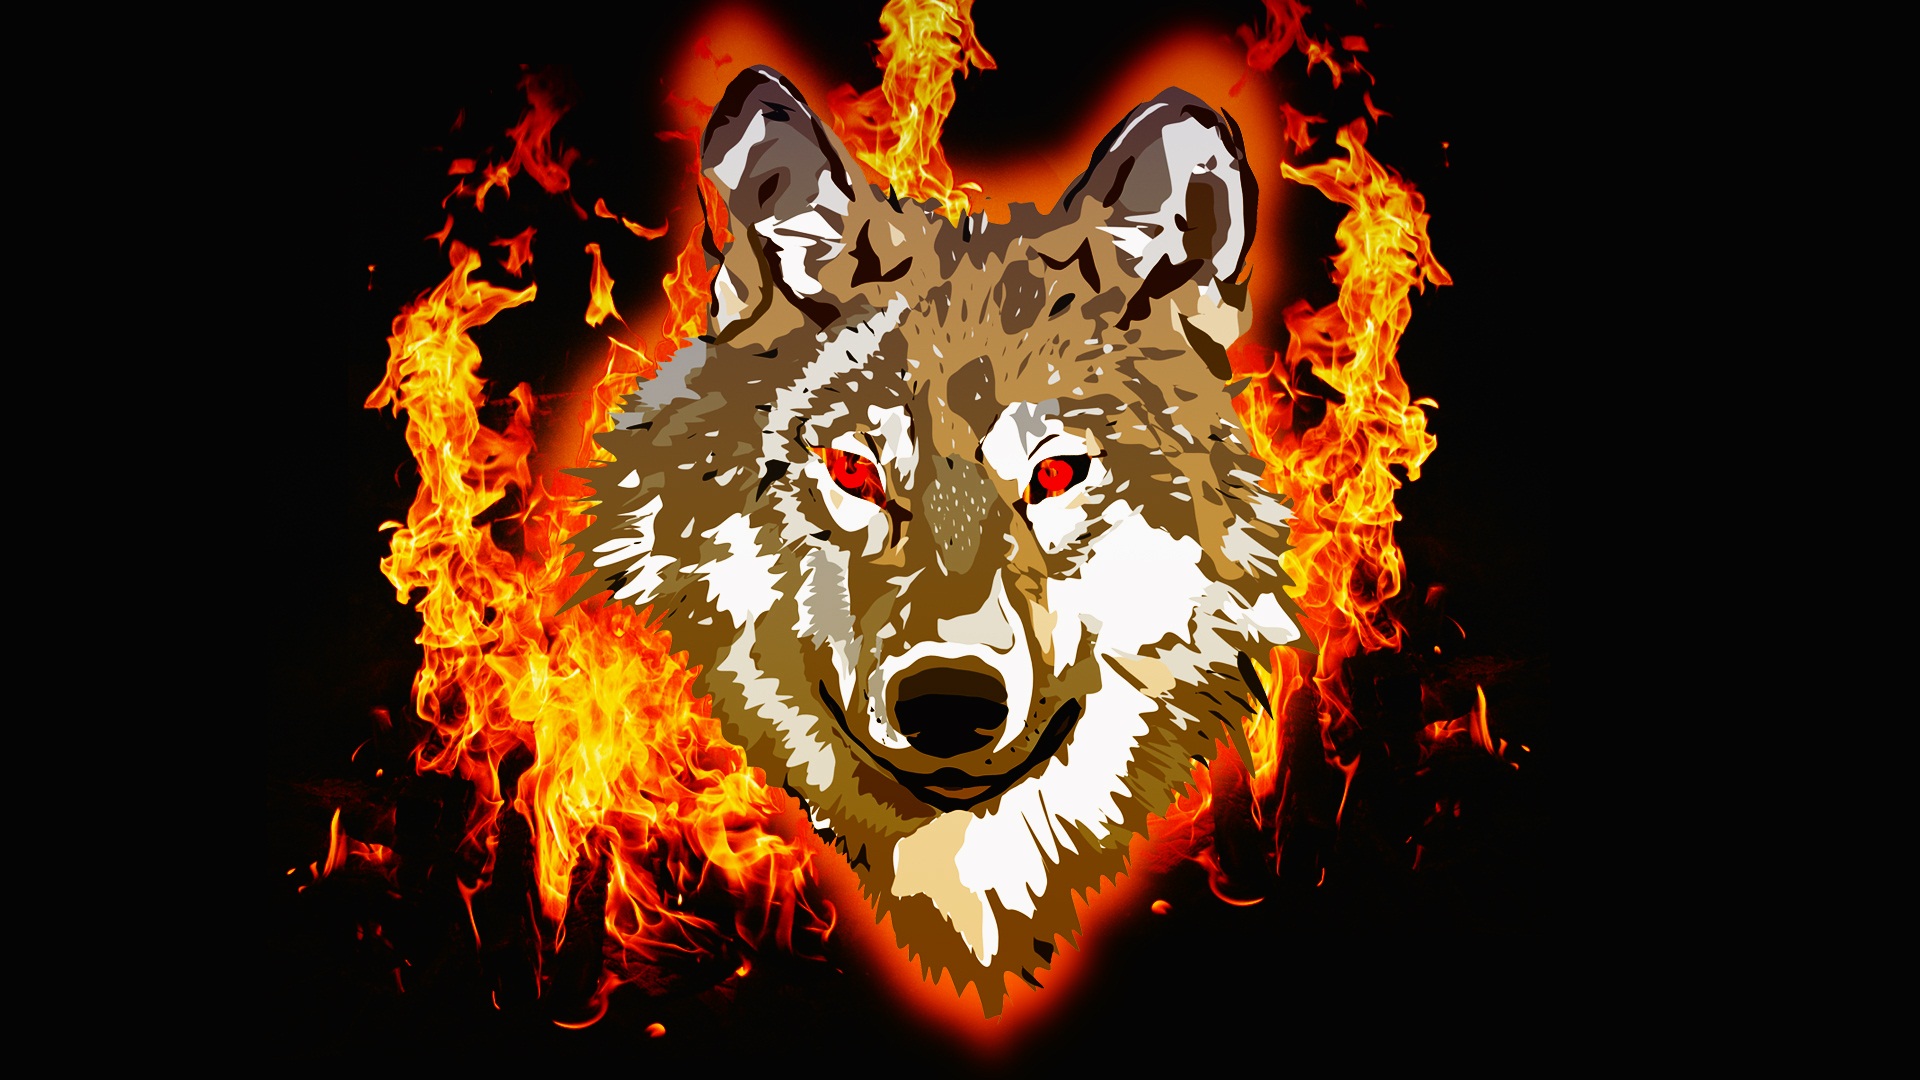 Download free Wolf Wallpaper 28939 available in different high-quality reso...